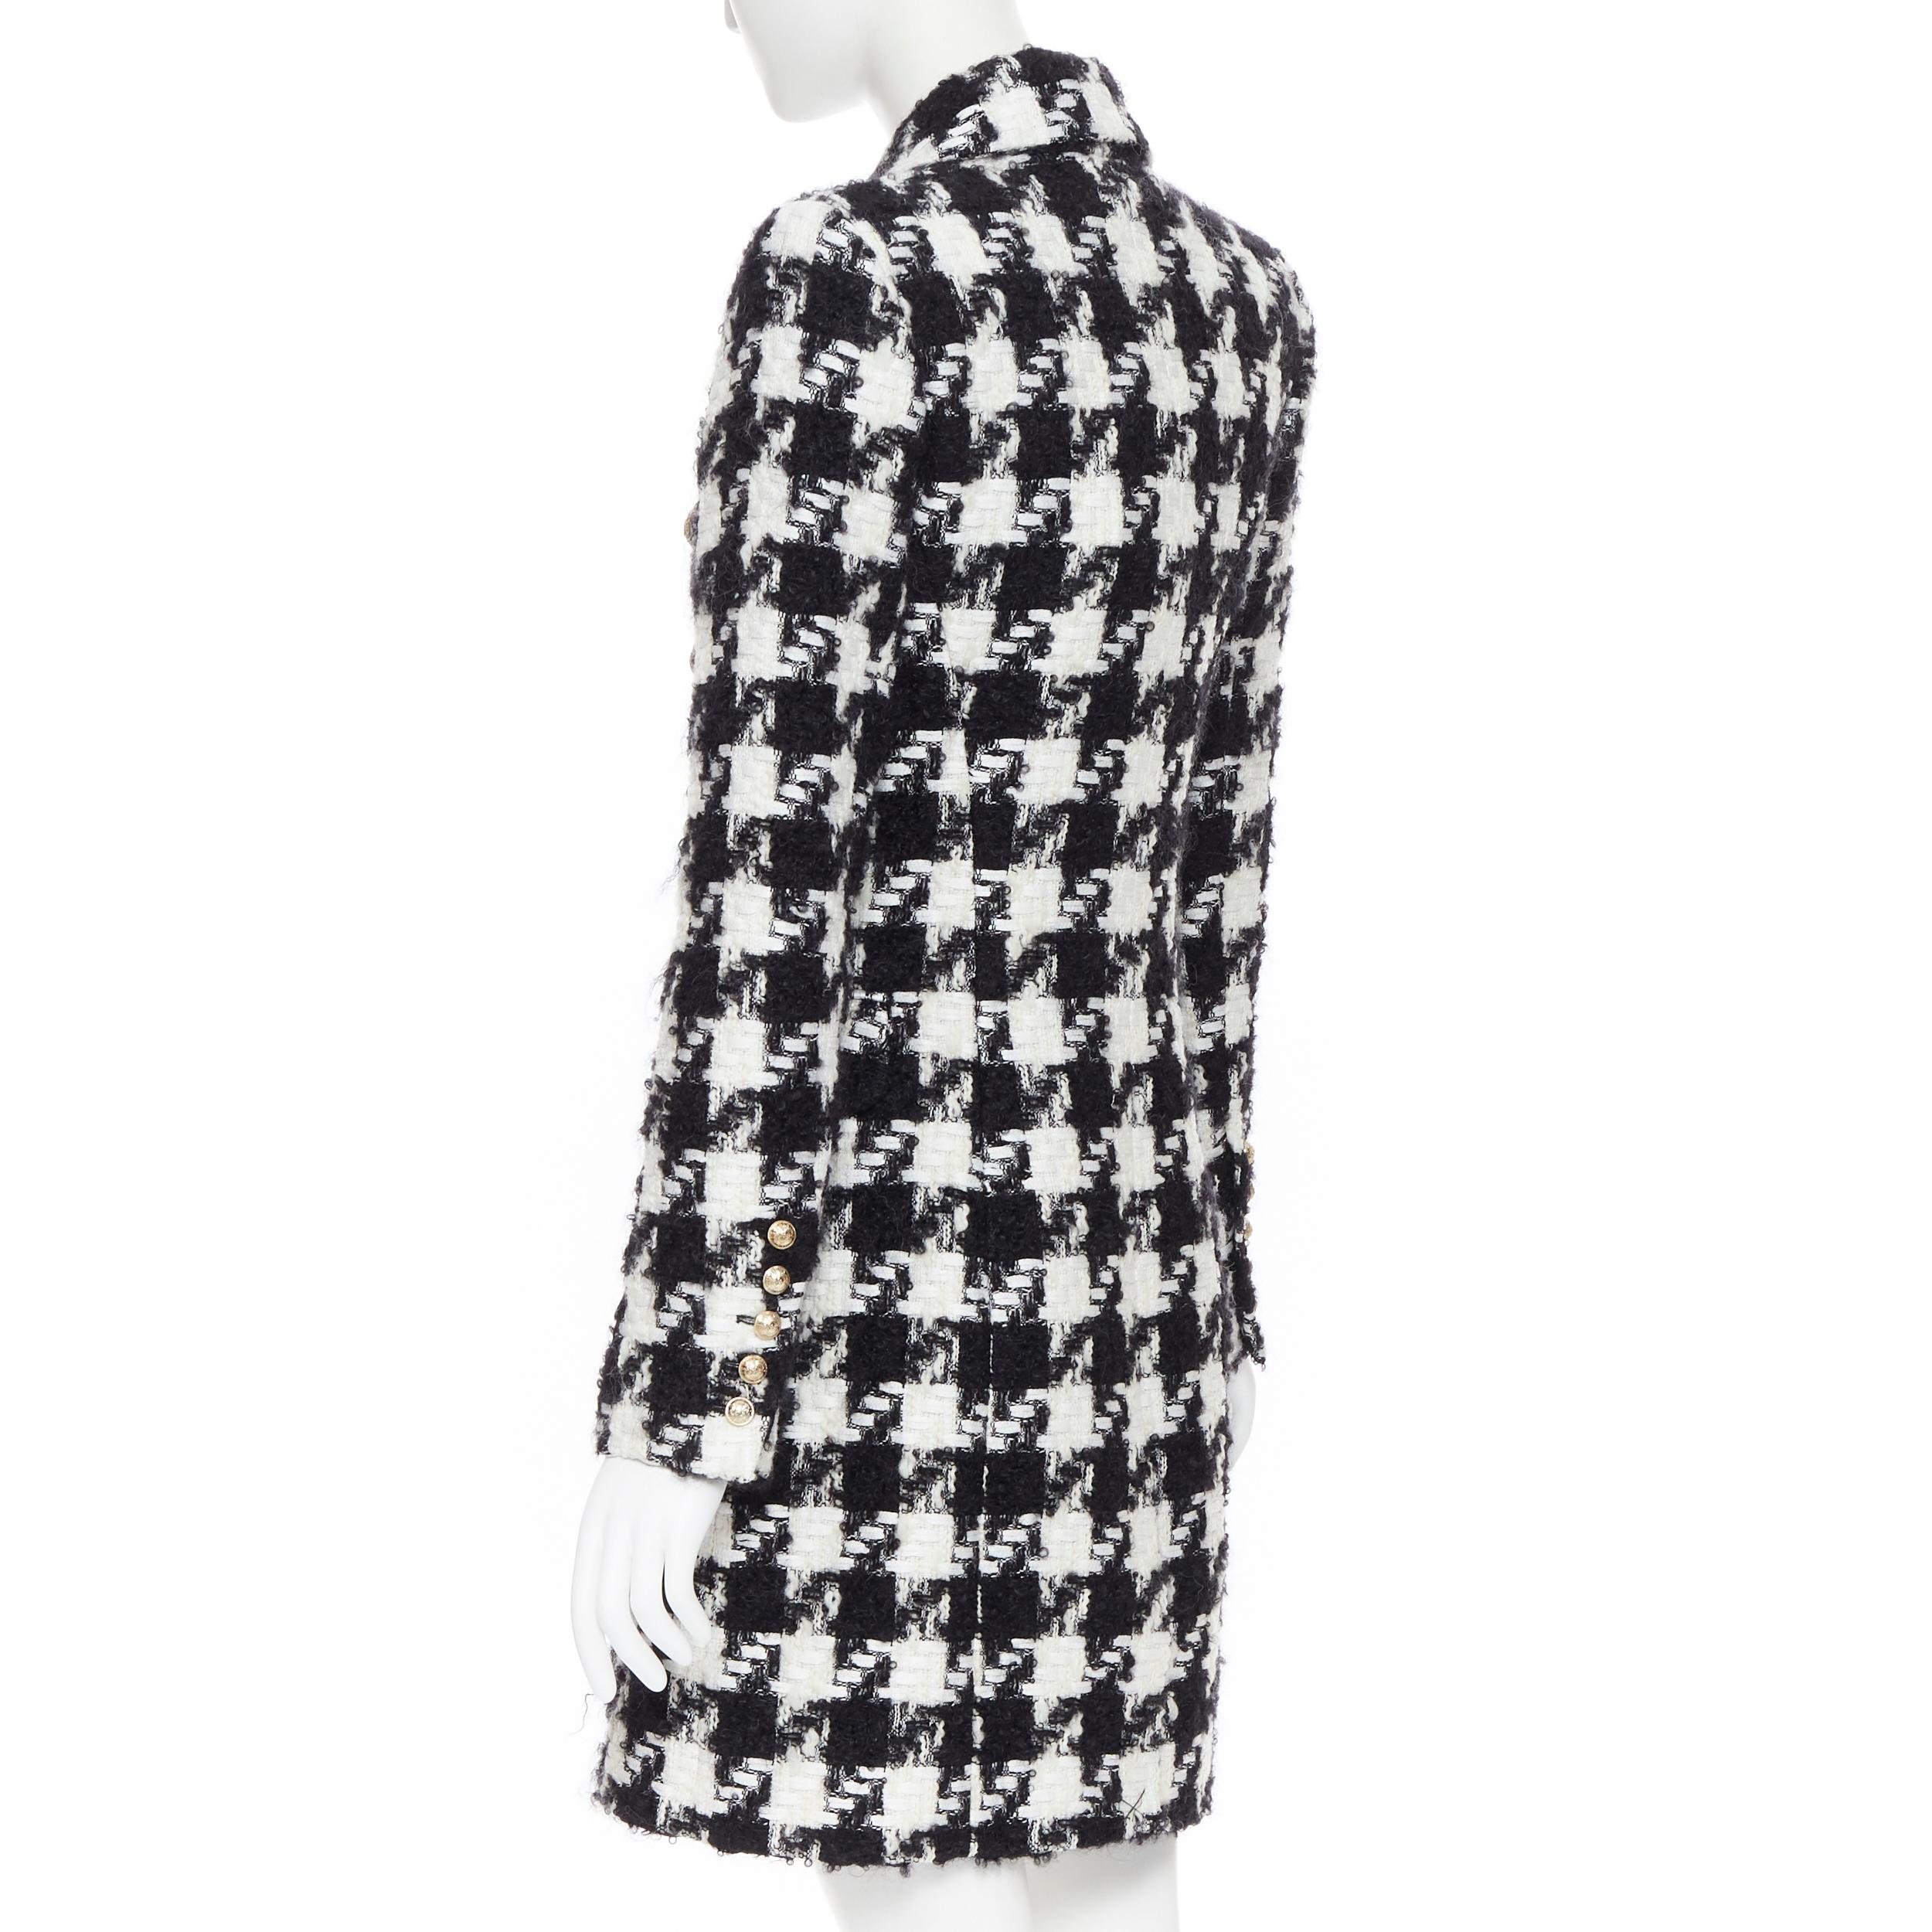 Women's new BALMAIN houndstooth black white tweed double breasted military coat FR34 XS